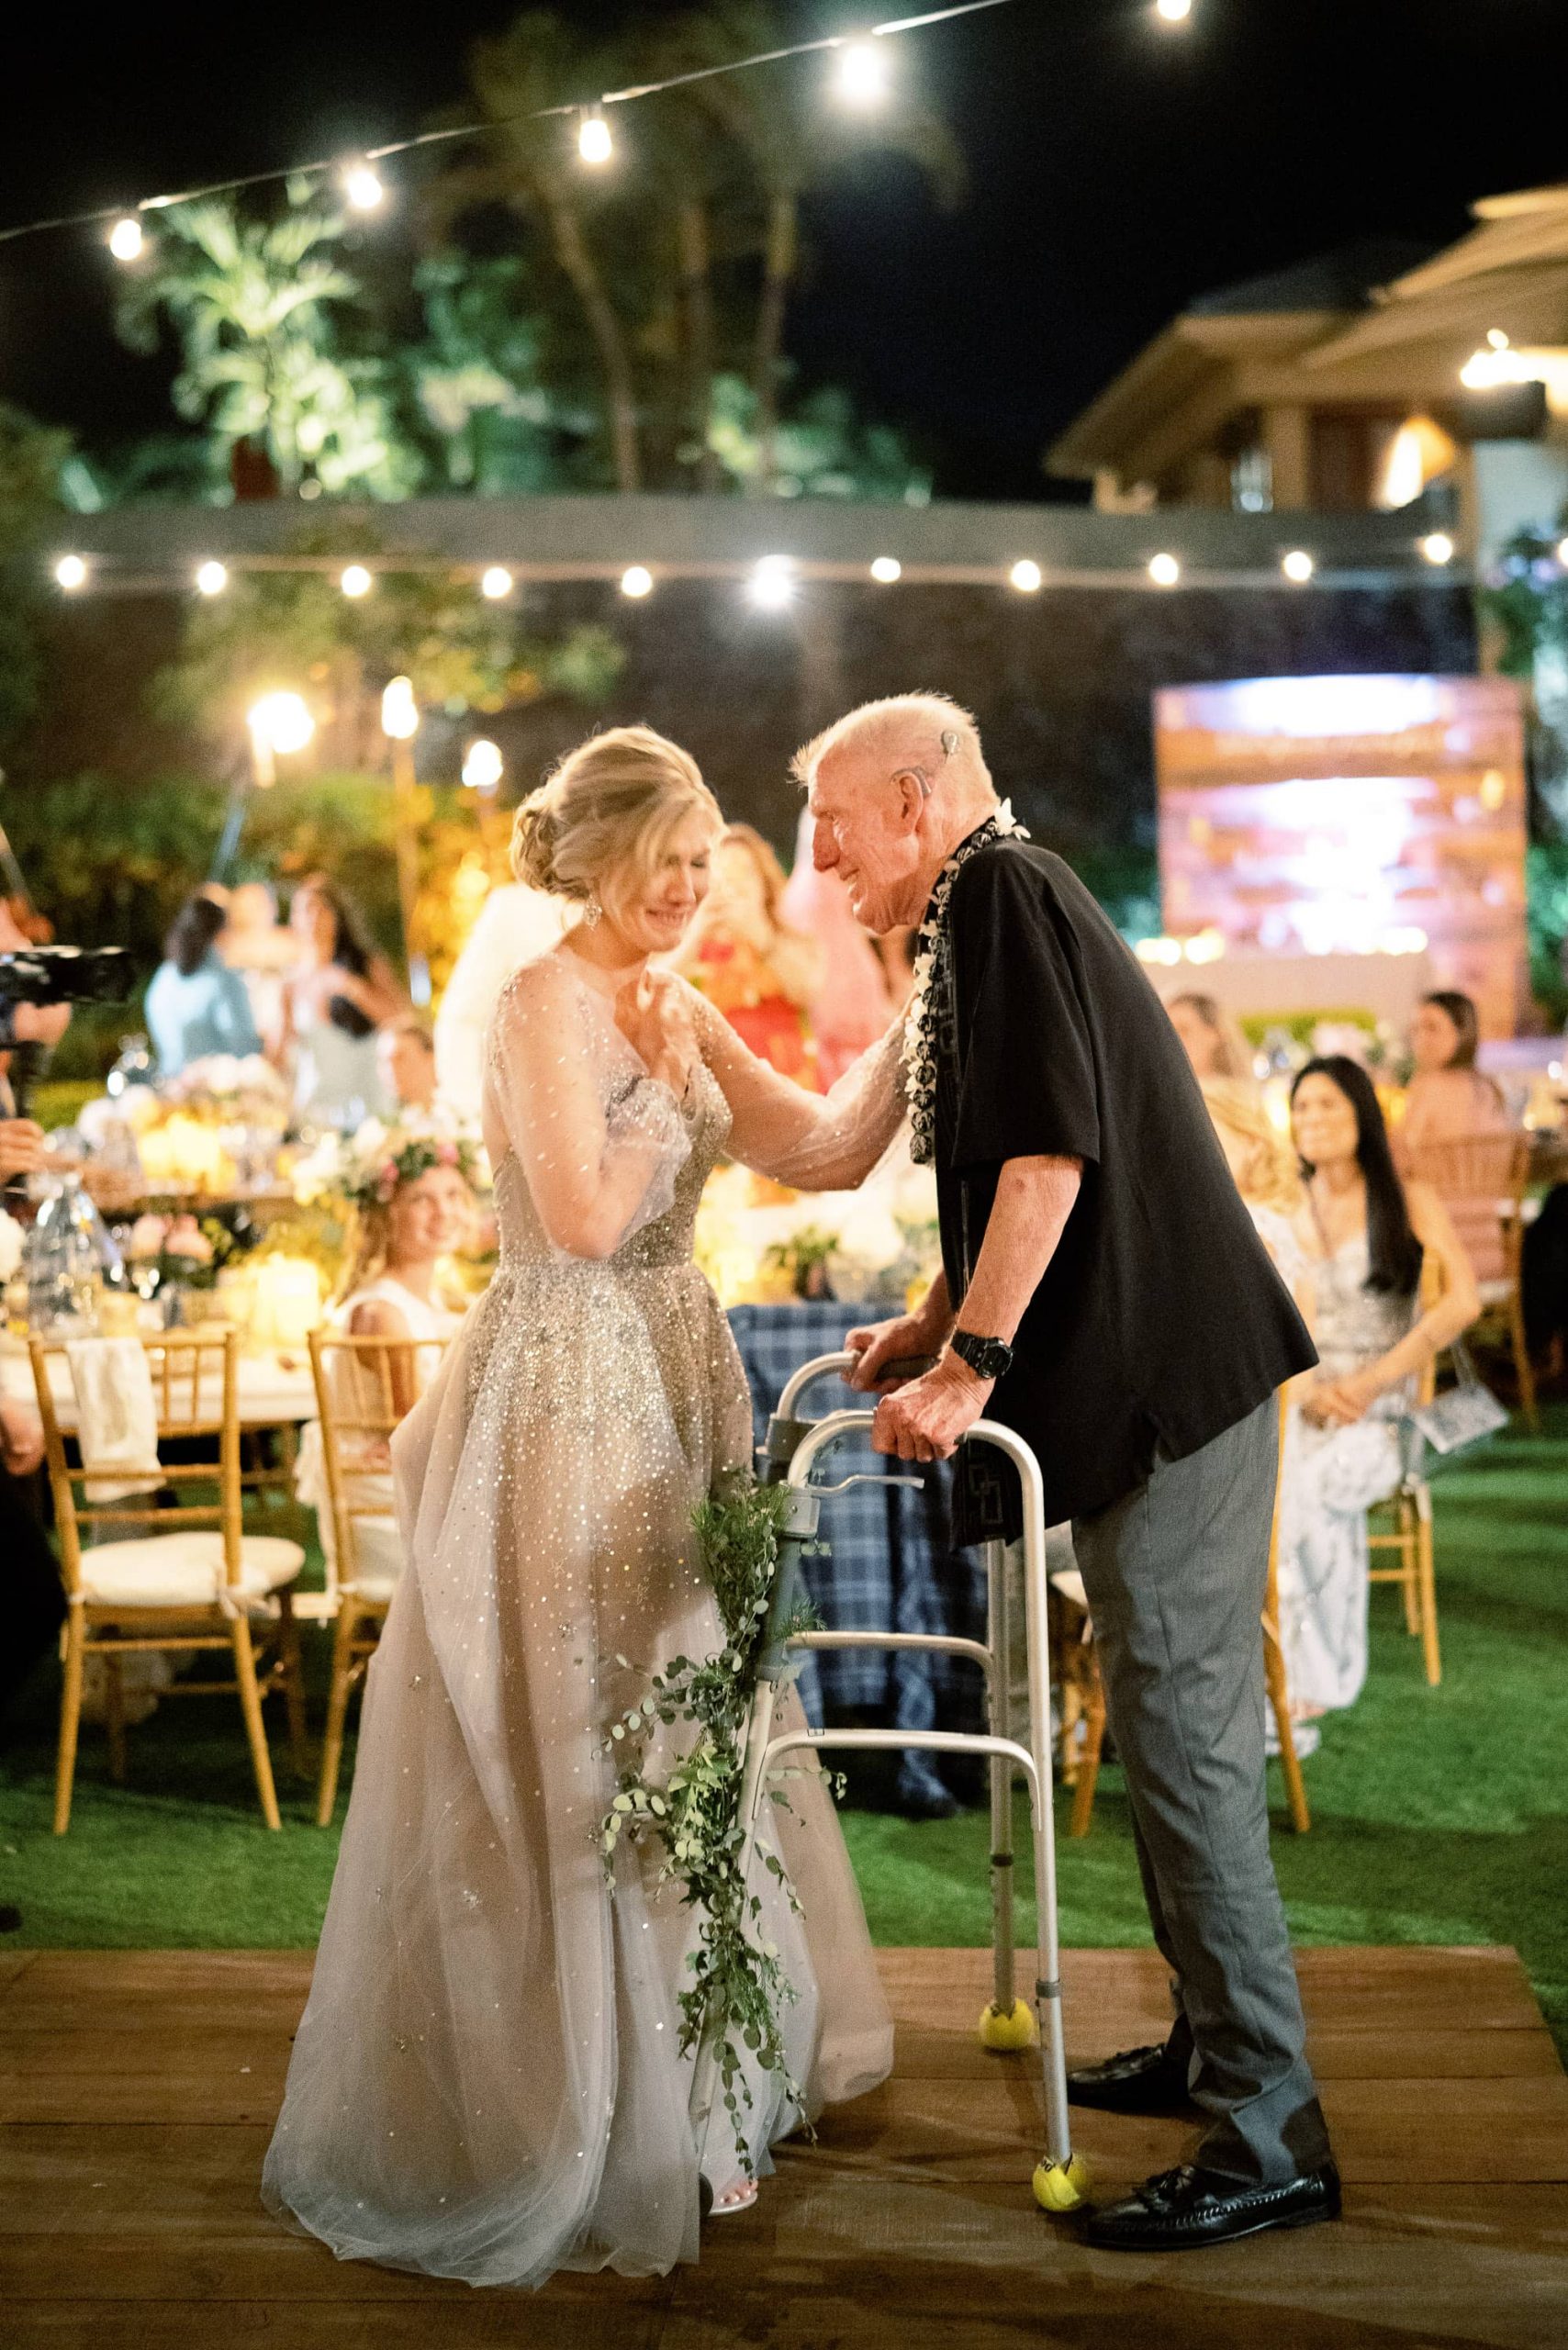 Bride and father during reception at Maui wedding at Four Seasons Resort Maui in Wailea, Hawaii | Photo by James x Schulze